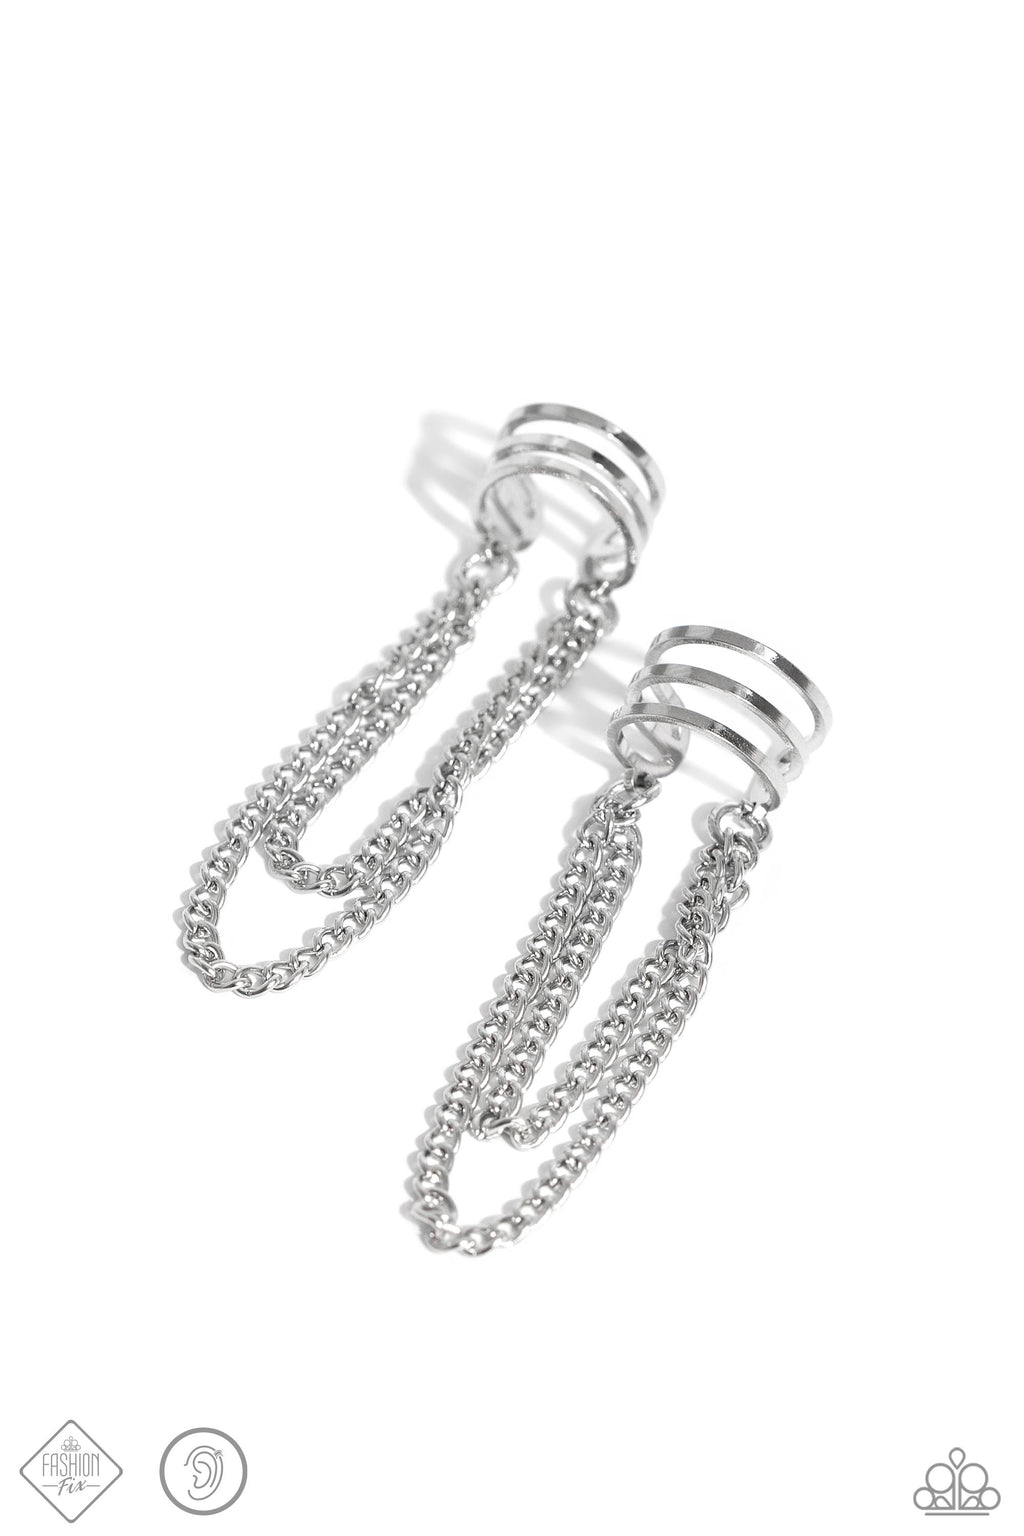 five-dollar-jewelry-unlocked-perfection-silver-post earrings-paparazzi-accessories